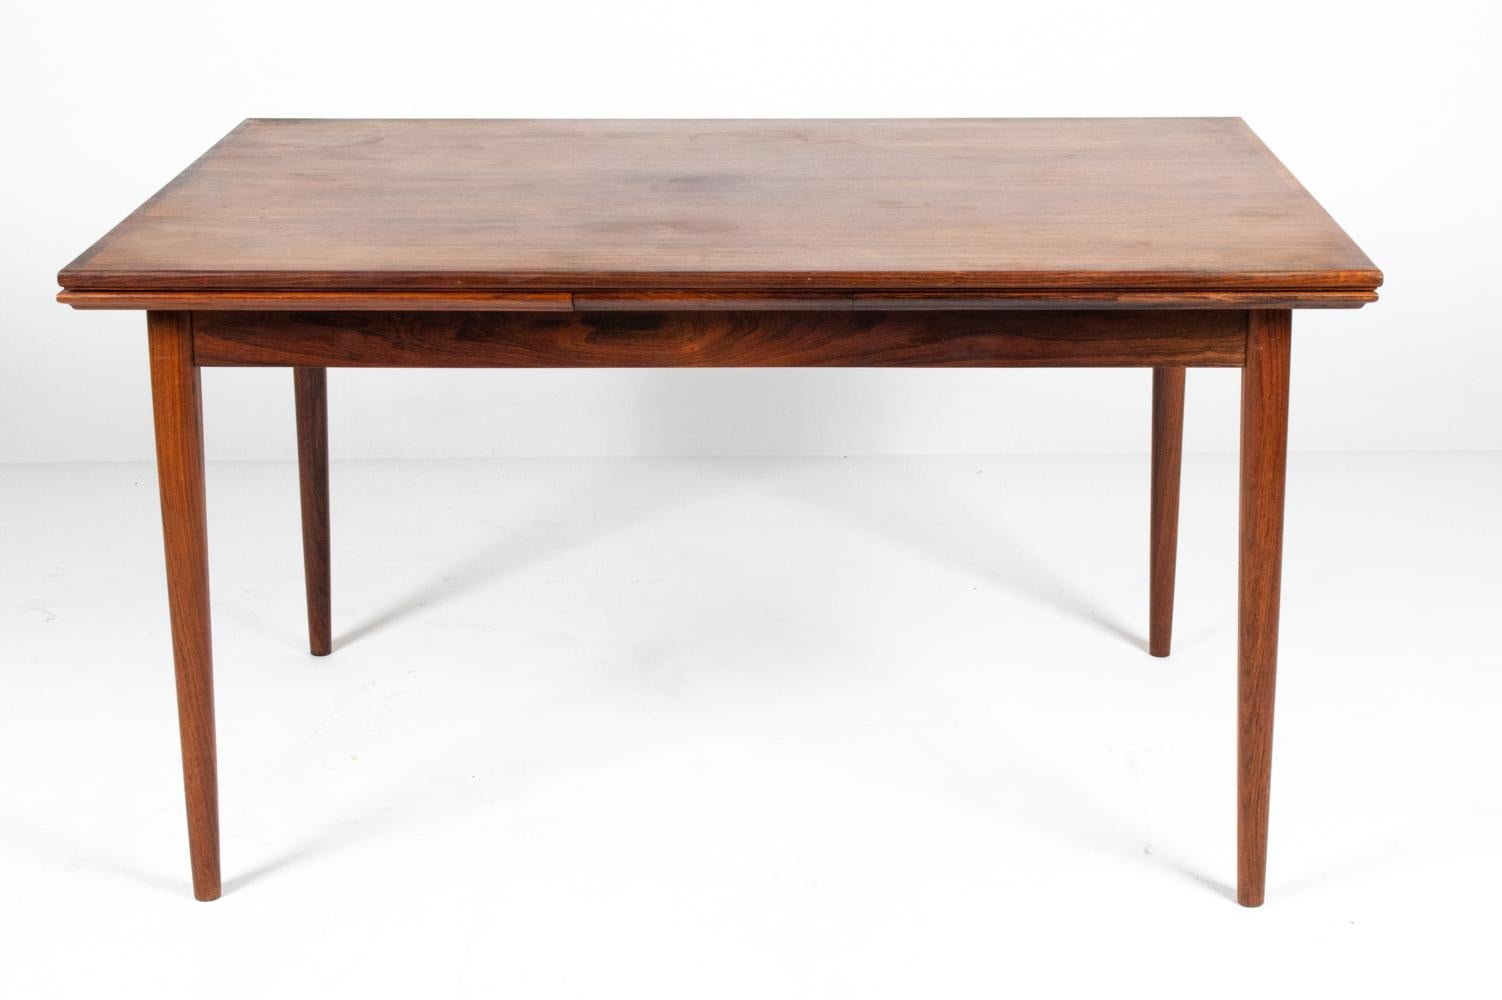 Danish Mid-Century Rosewood Extension Dining Table, c. 1960's For Sale 3